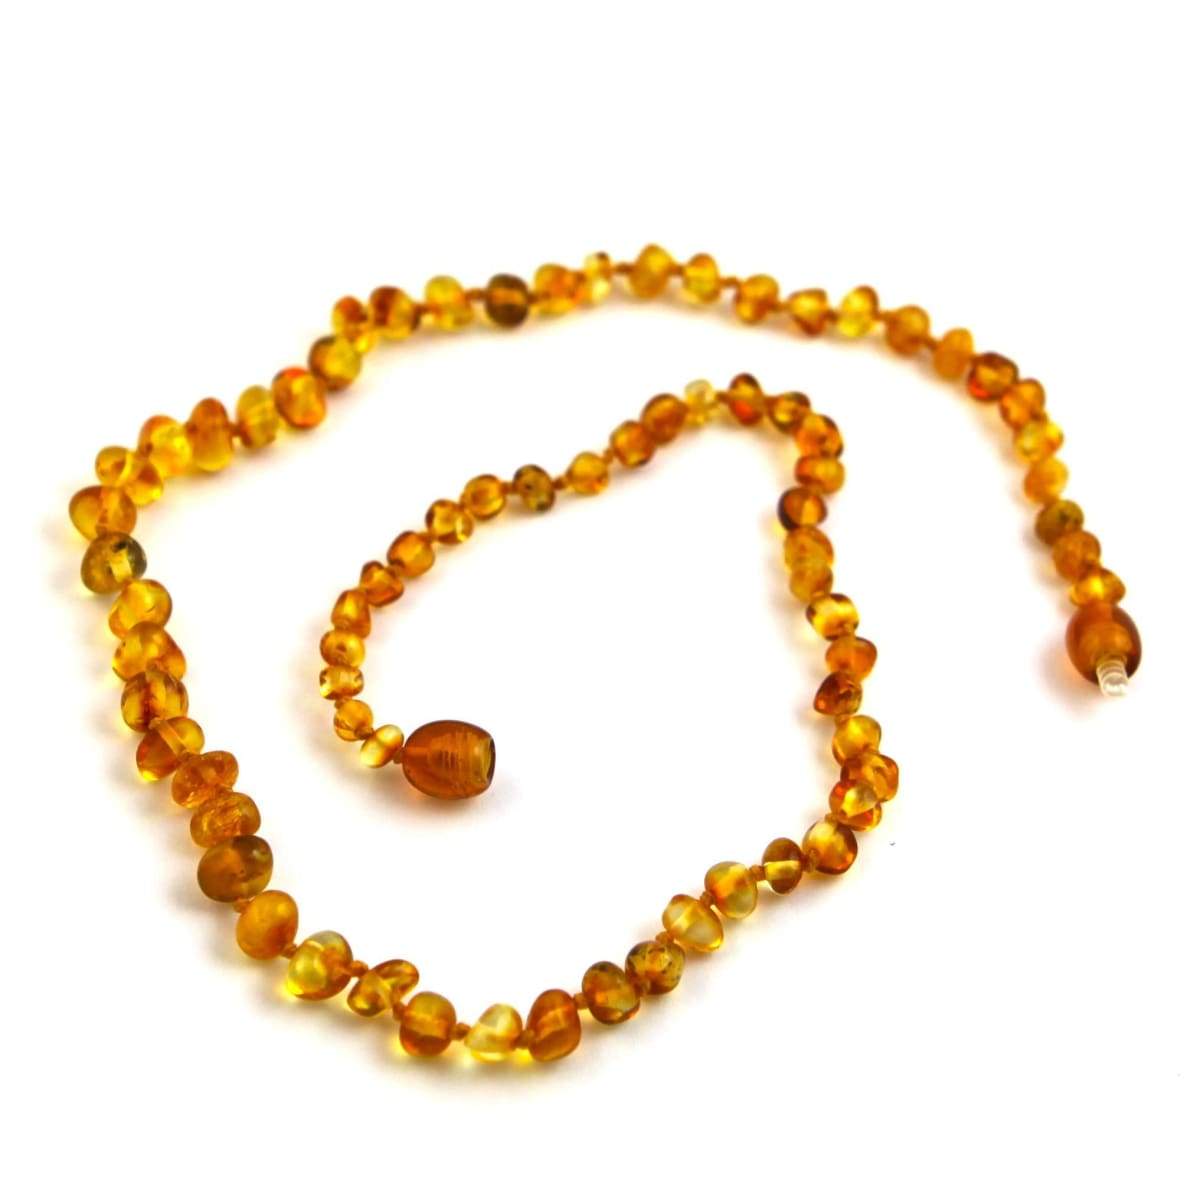 Baltic Amber Therapeutic Jewelry on Sale